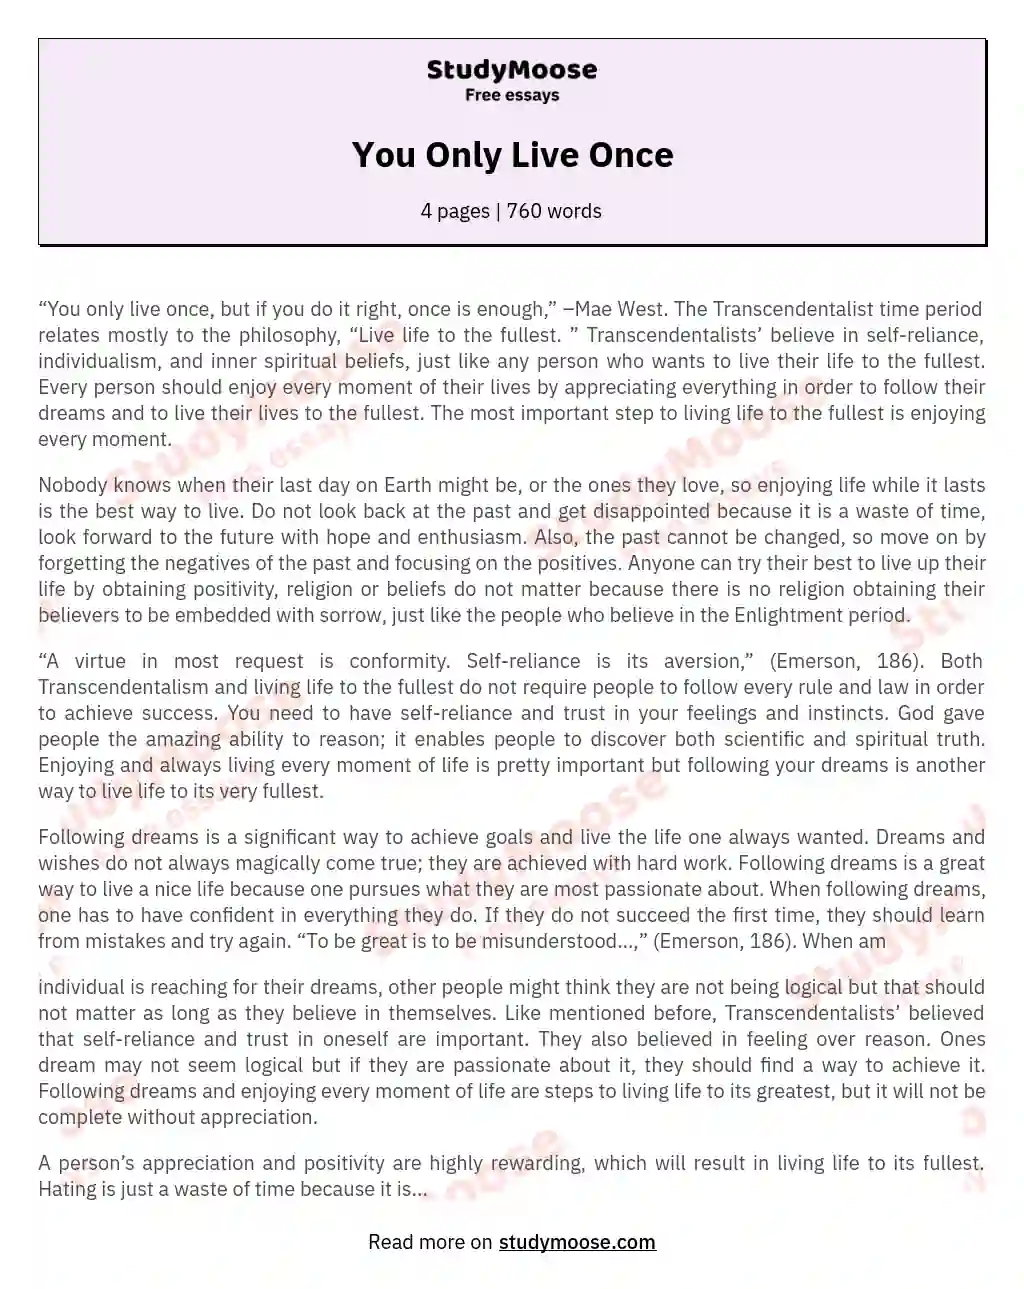 You Only Live Once essay